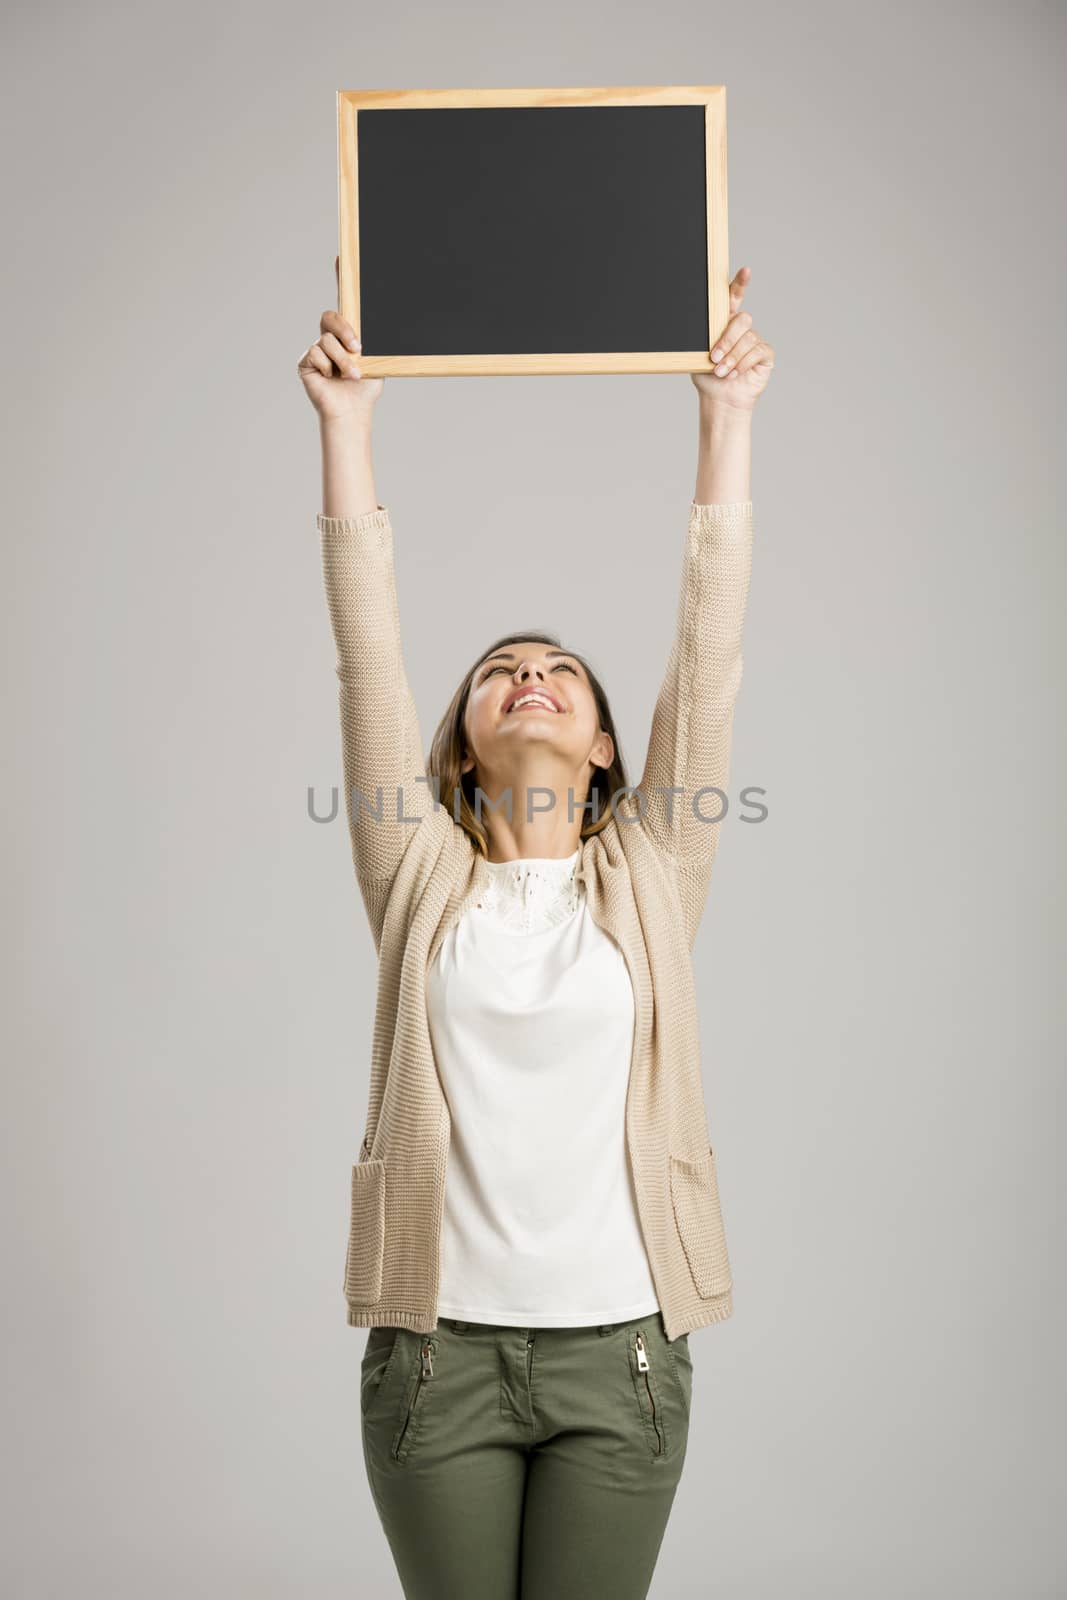 Beautiful and happy woman holding and showing a chalkboard very high